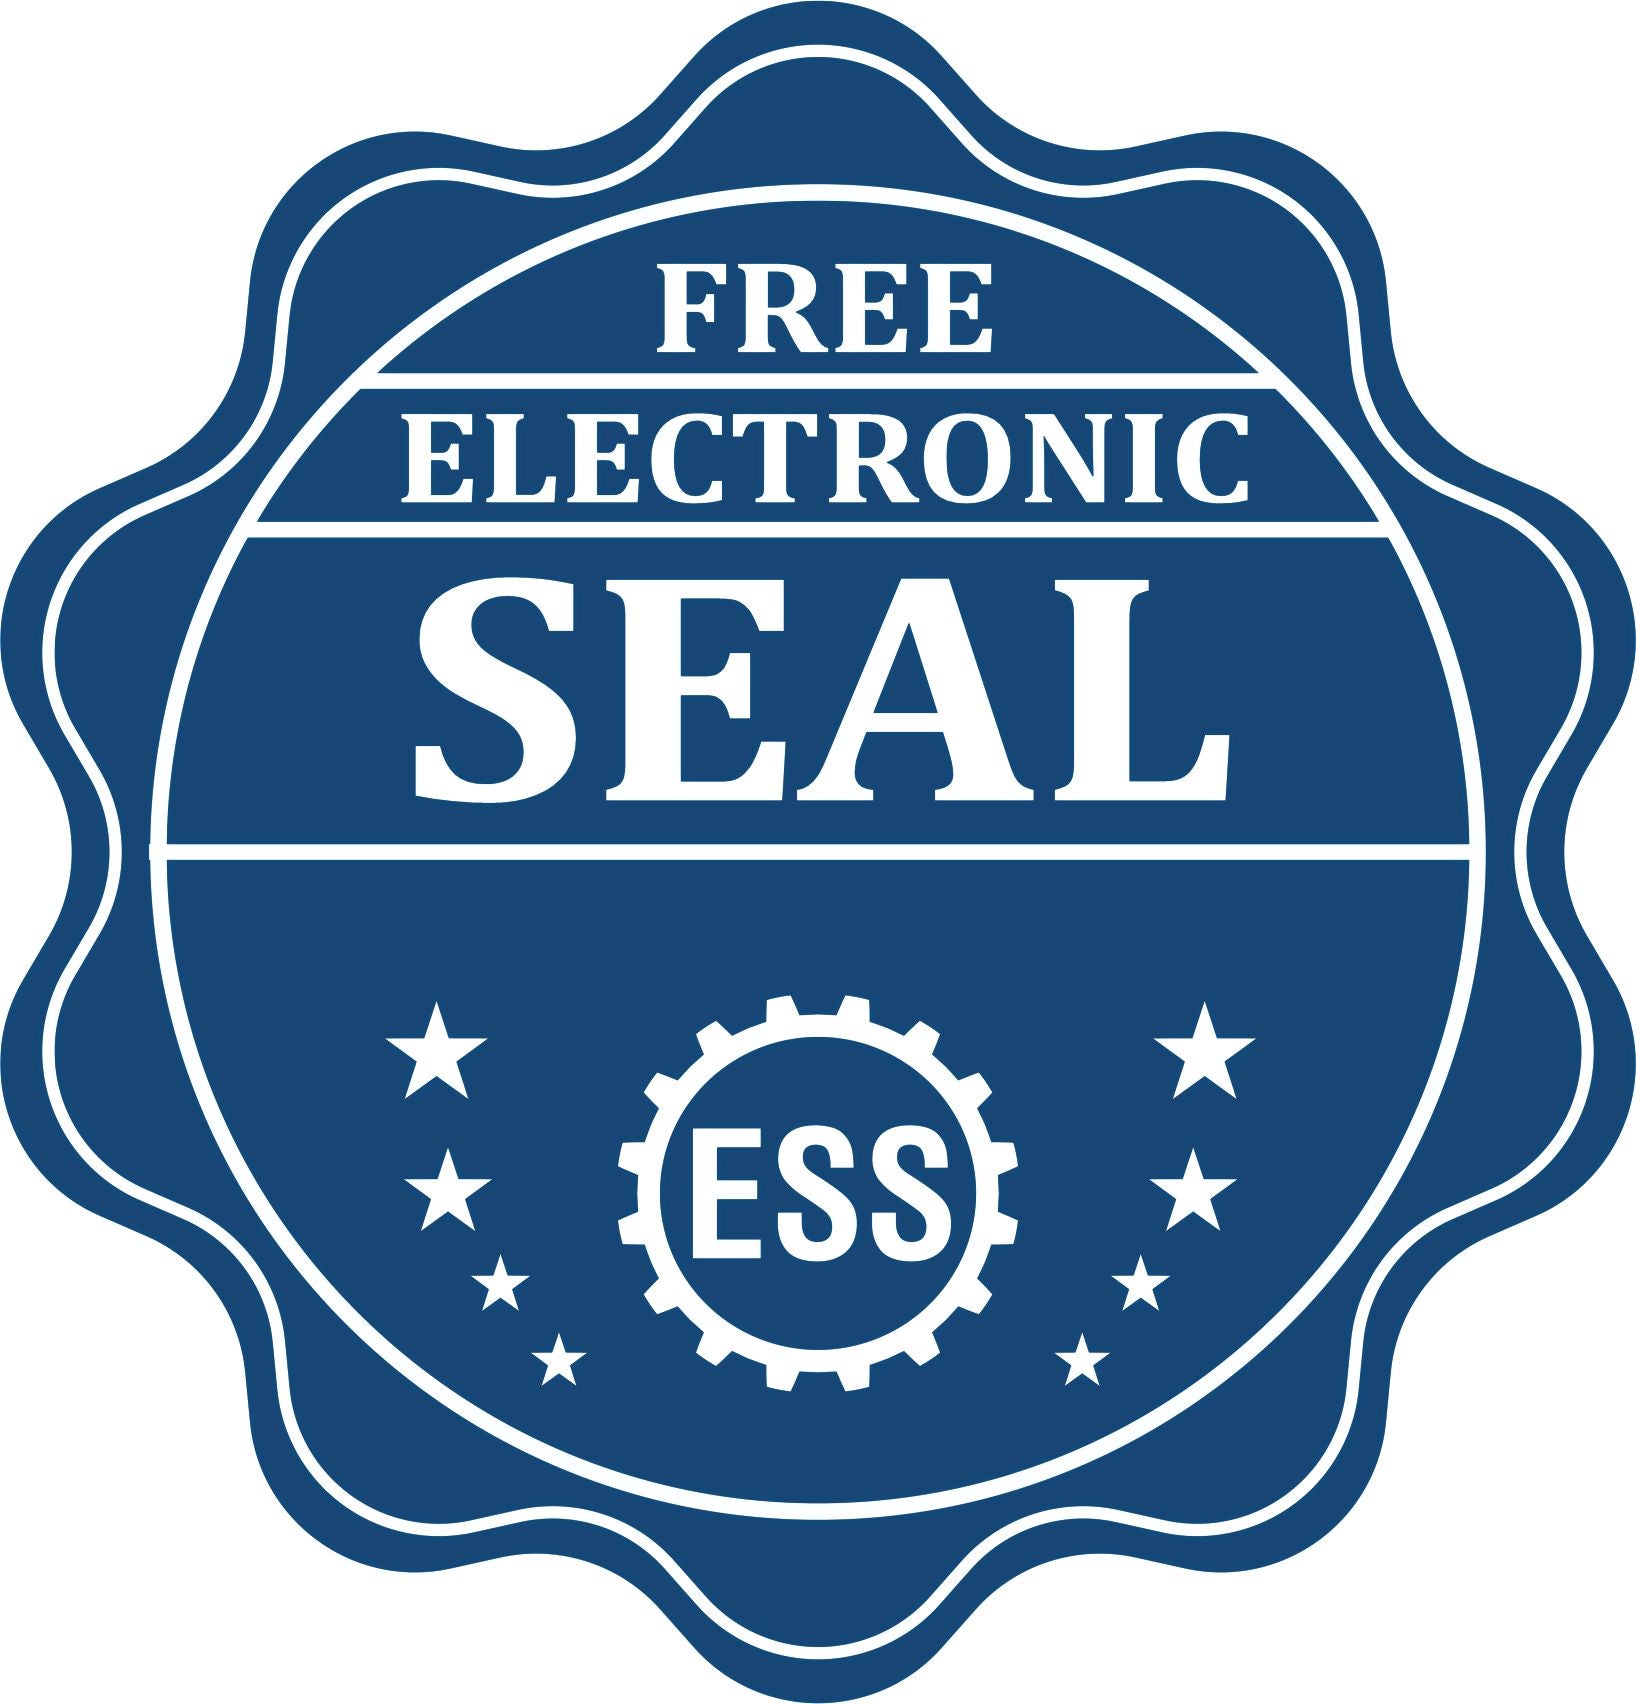 A badge showing a free electronic seal for the Premium MaxLight Pre-Inked Maine Geology Stamp with stars and the ESS gear on the emblem.